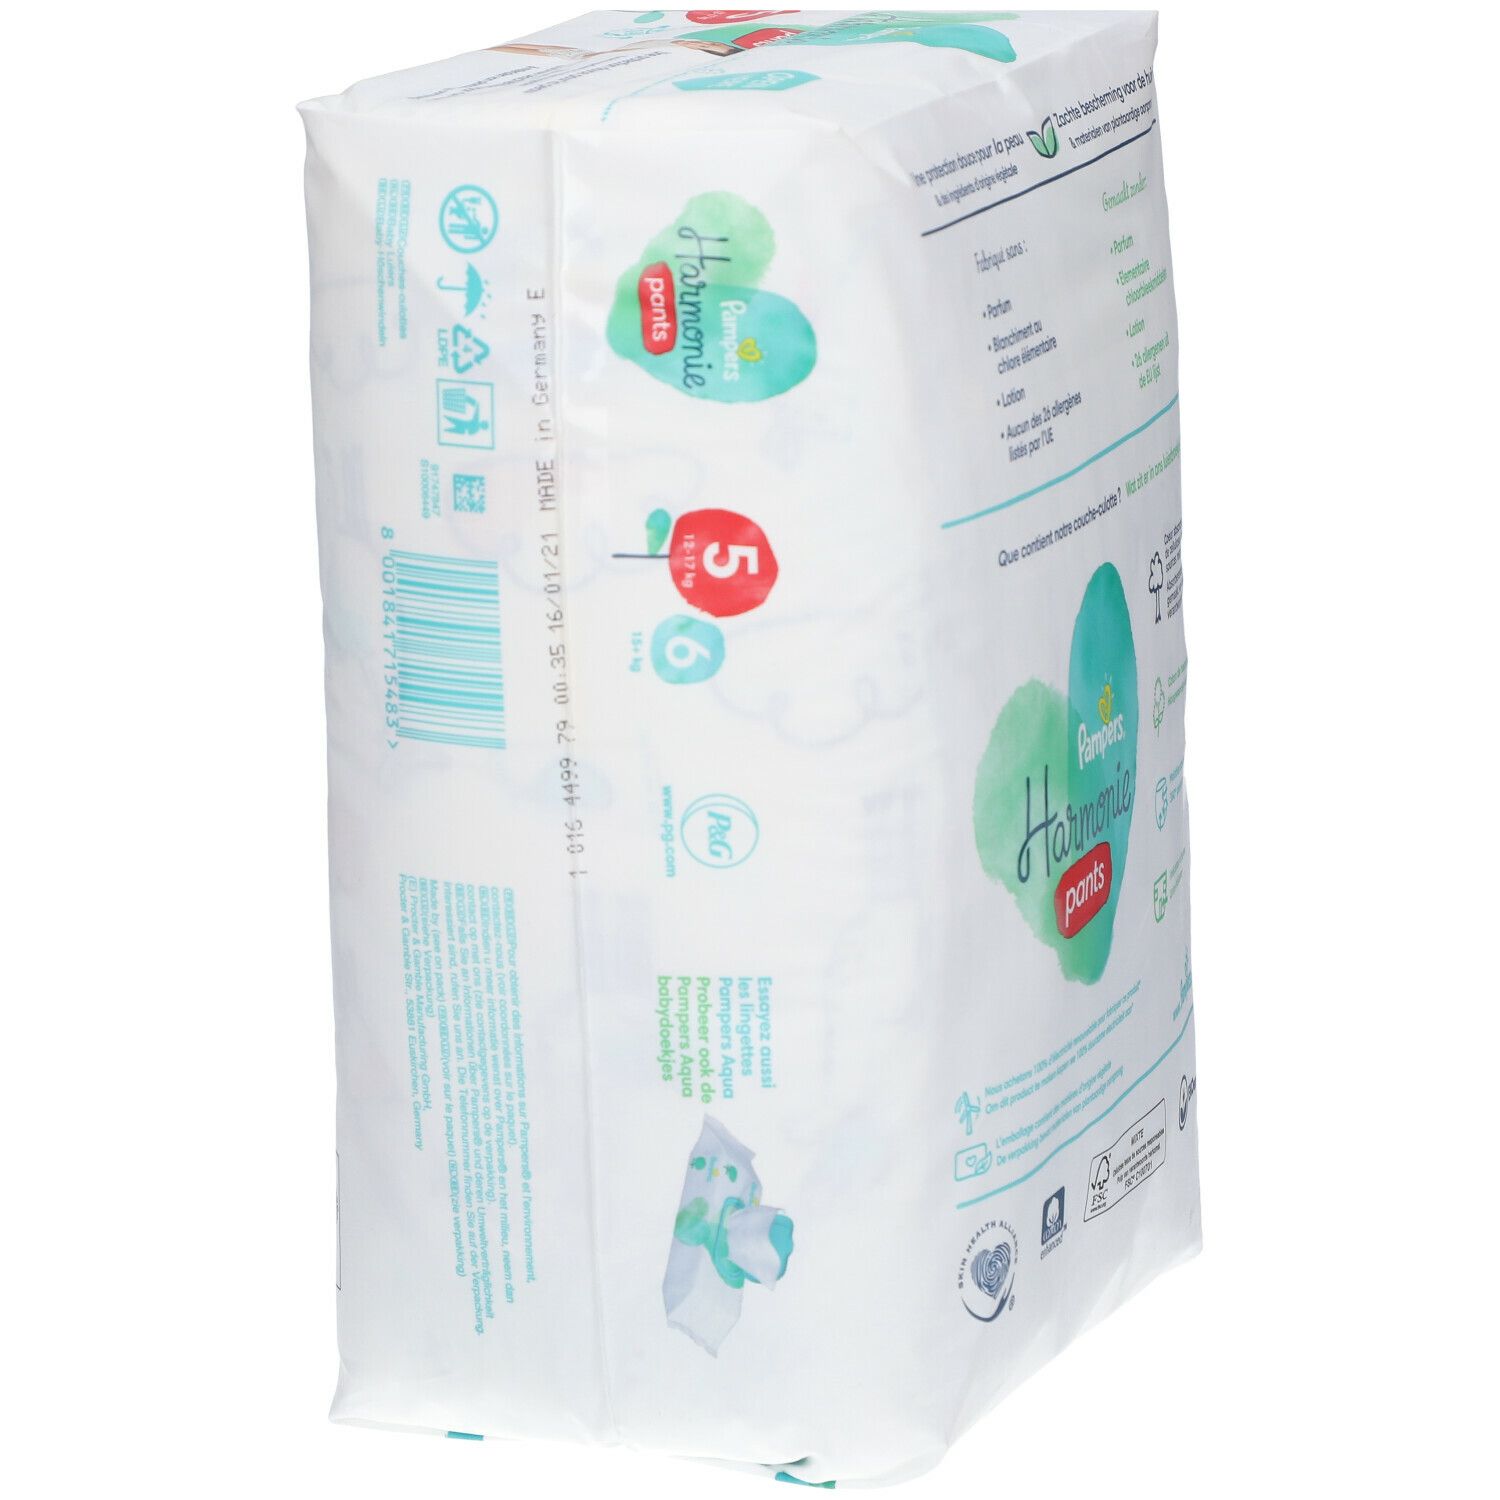 Pampers - Harmonie couches taille 1, 35 pcs